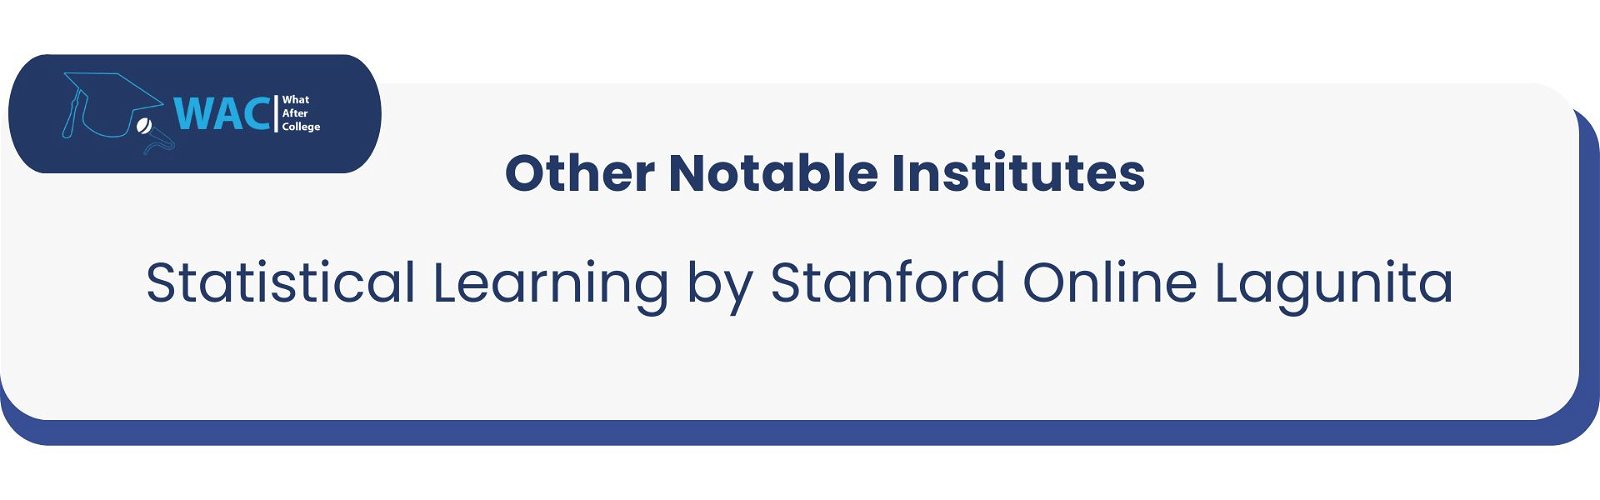 Statistical Learning by Stanford Online Lagunita